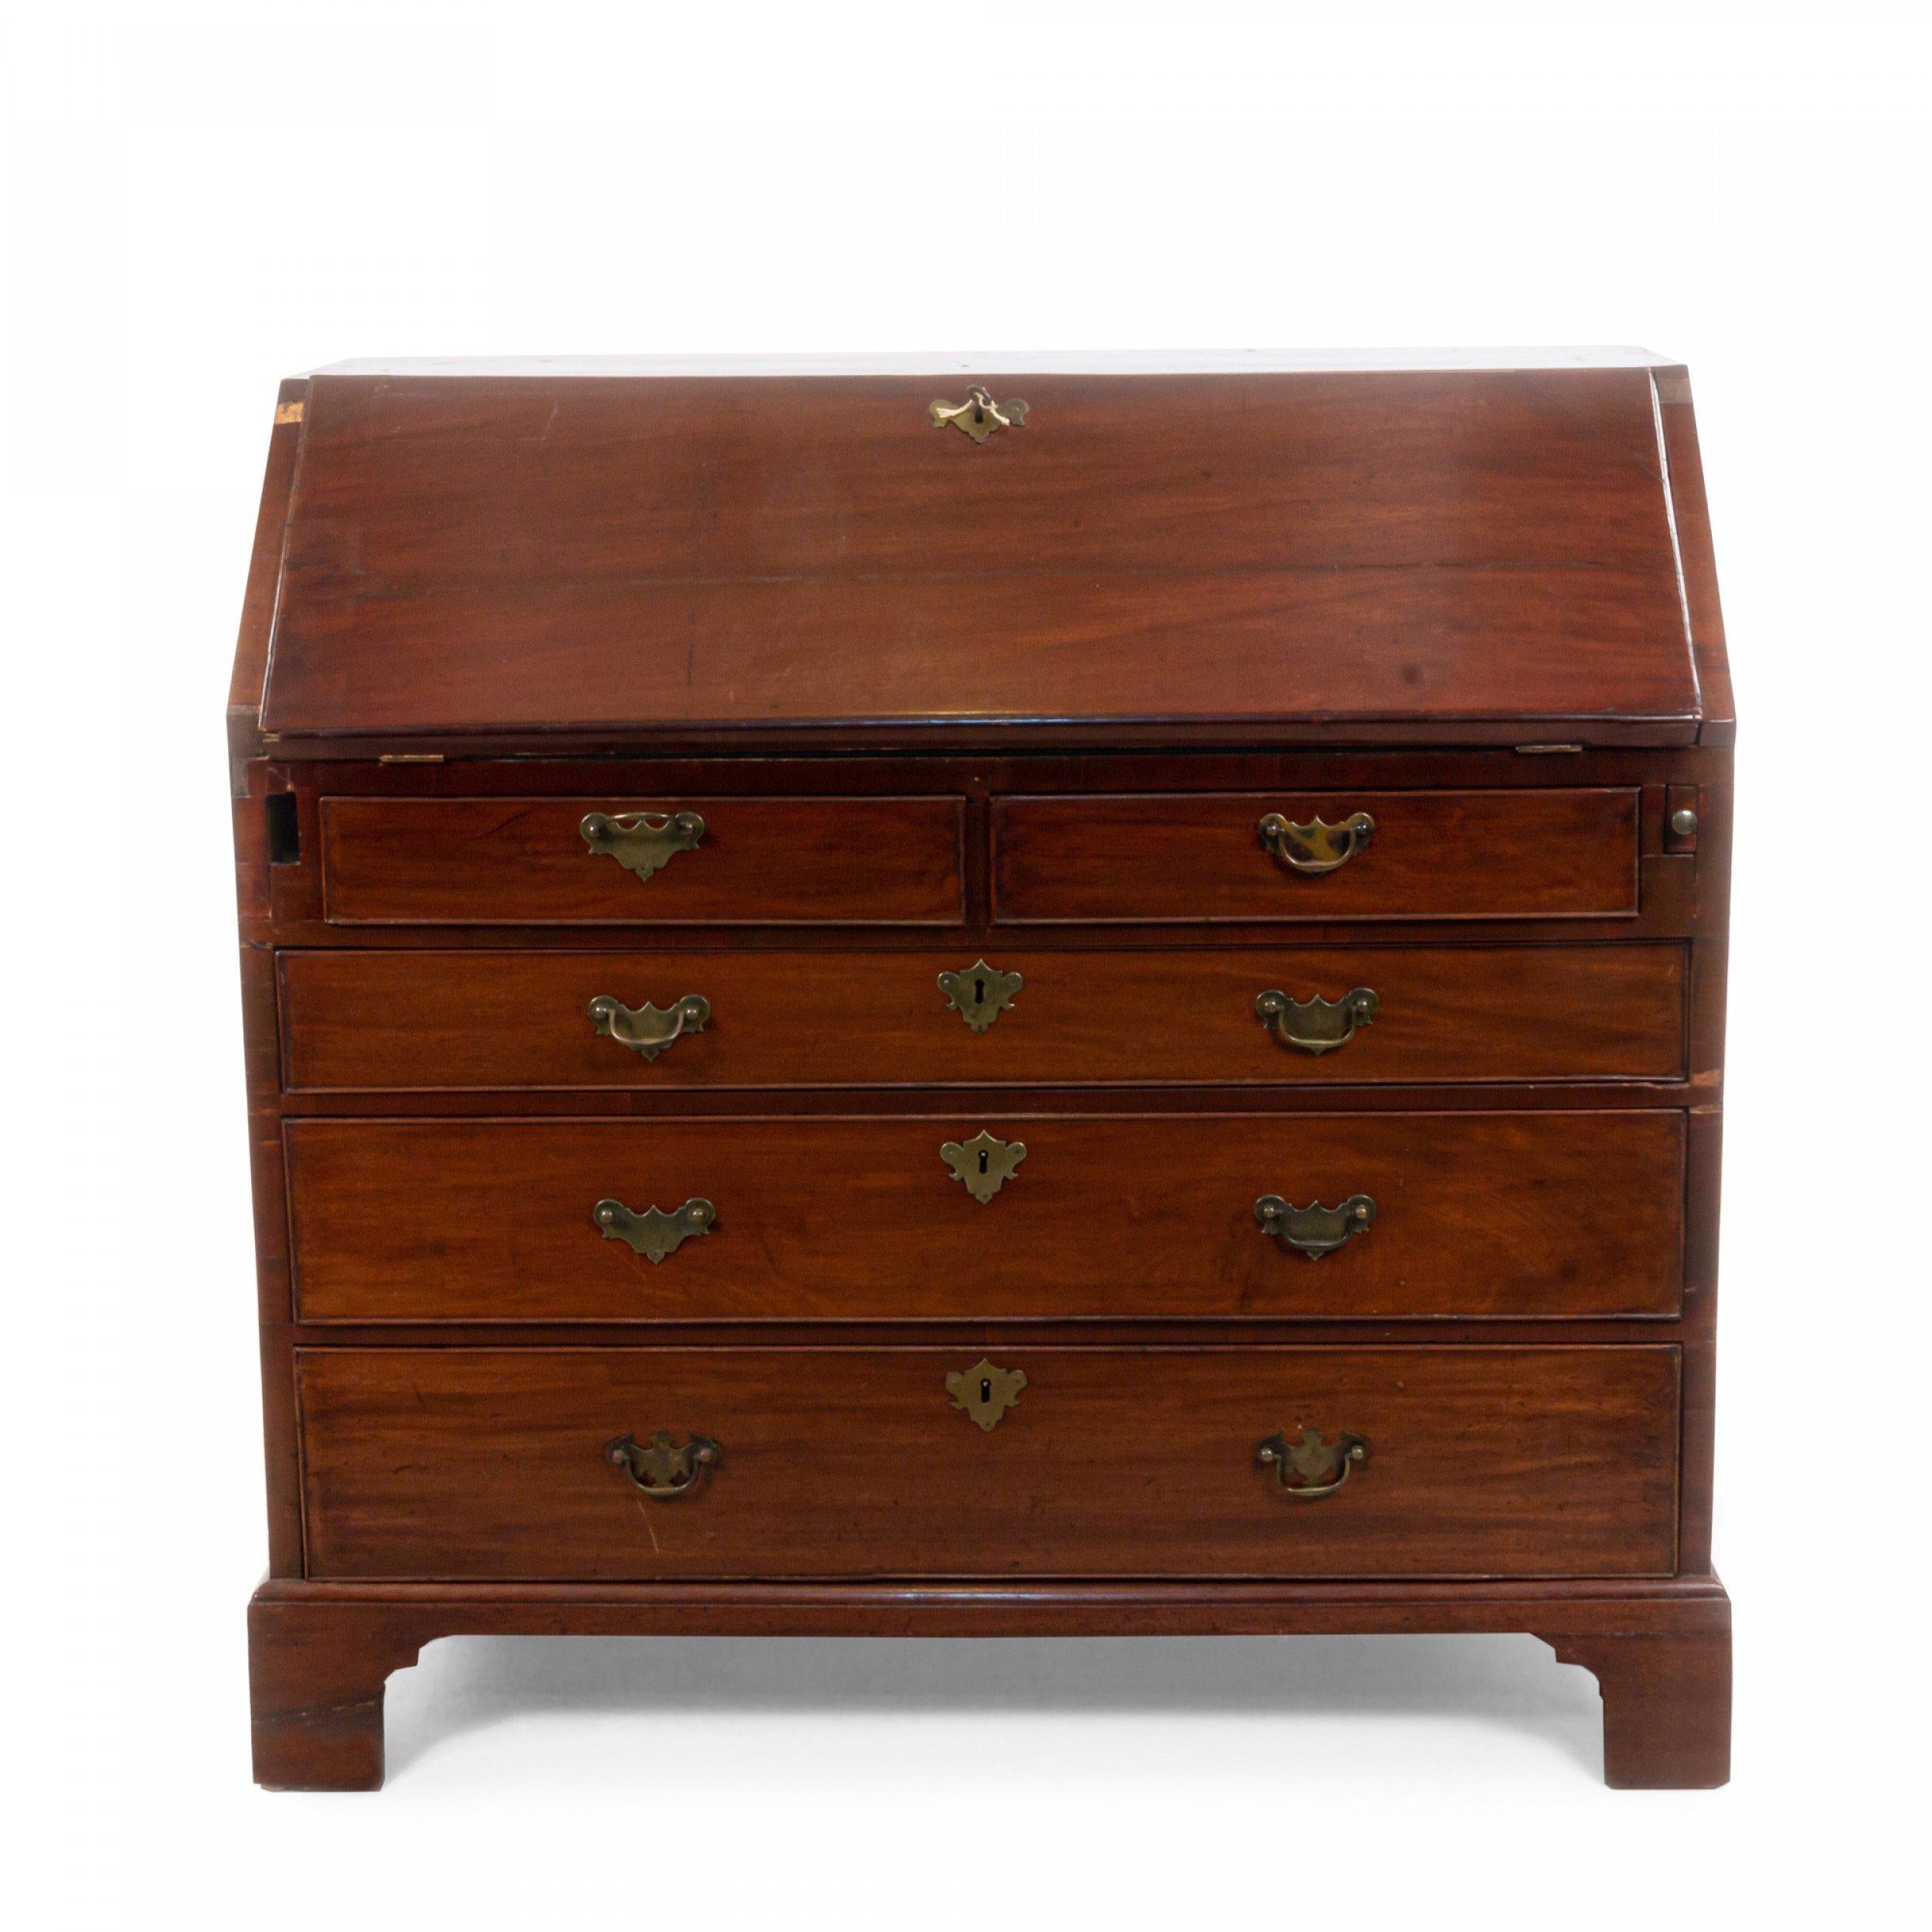 American 18th-19th century block front mahogany secretary desk with a slant top drop front over 3 drawers supported on ogee bracket feet.